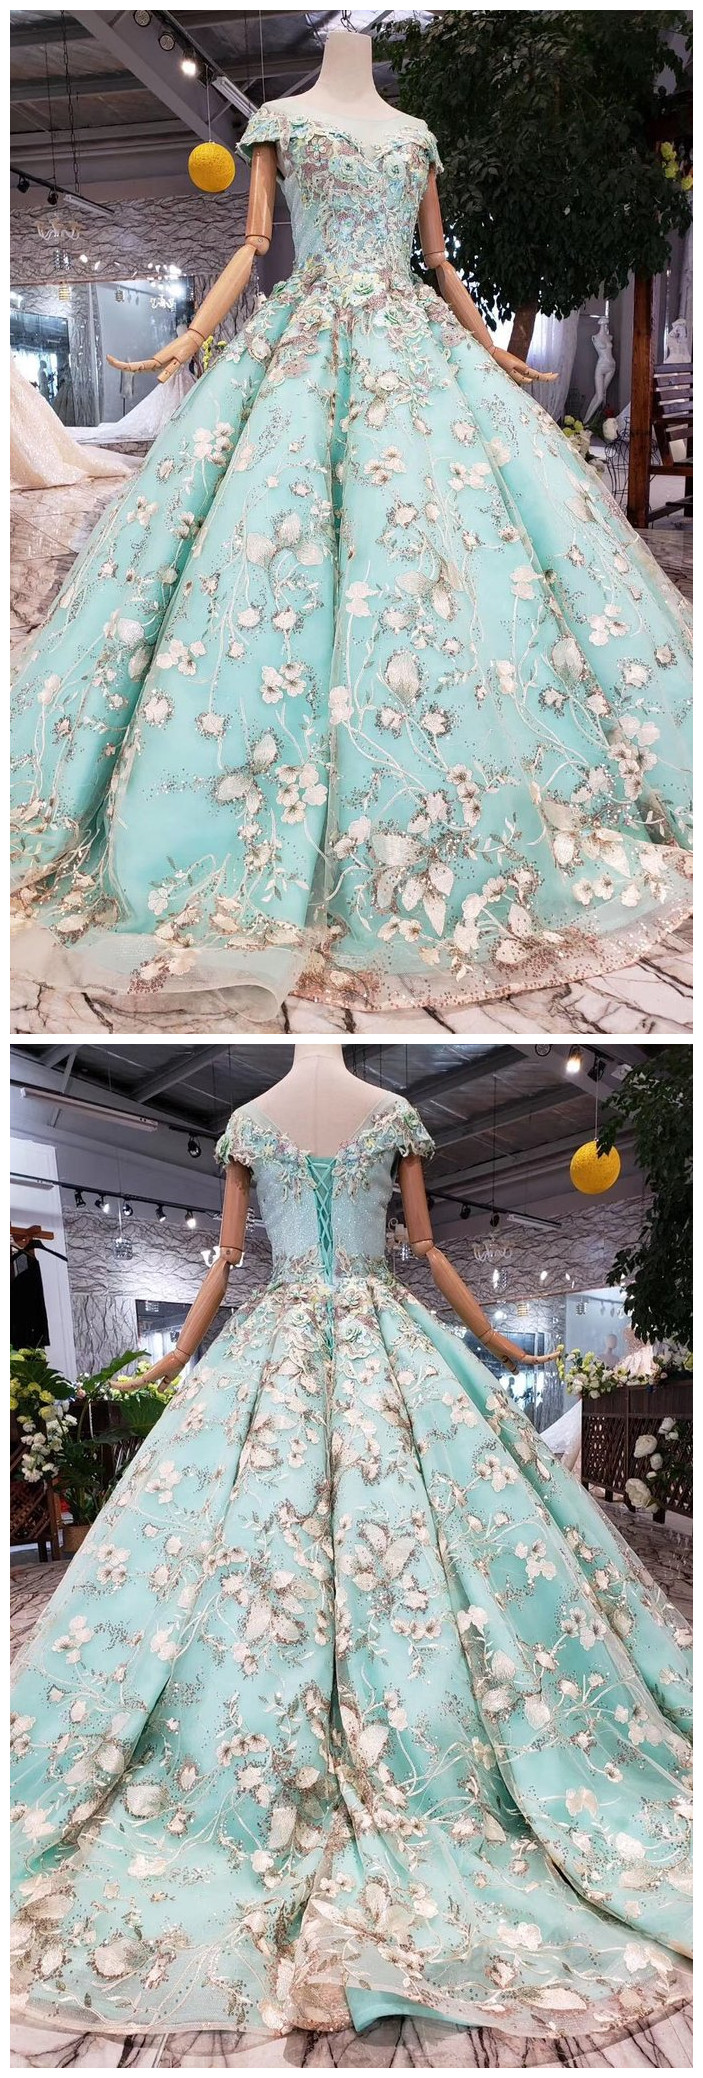 Big Sheer Neck Puffy Prom Dress With Cap Sleeves, Fairy Tale Lace Dress With Beading